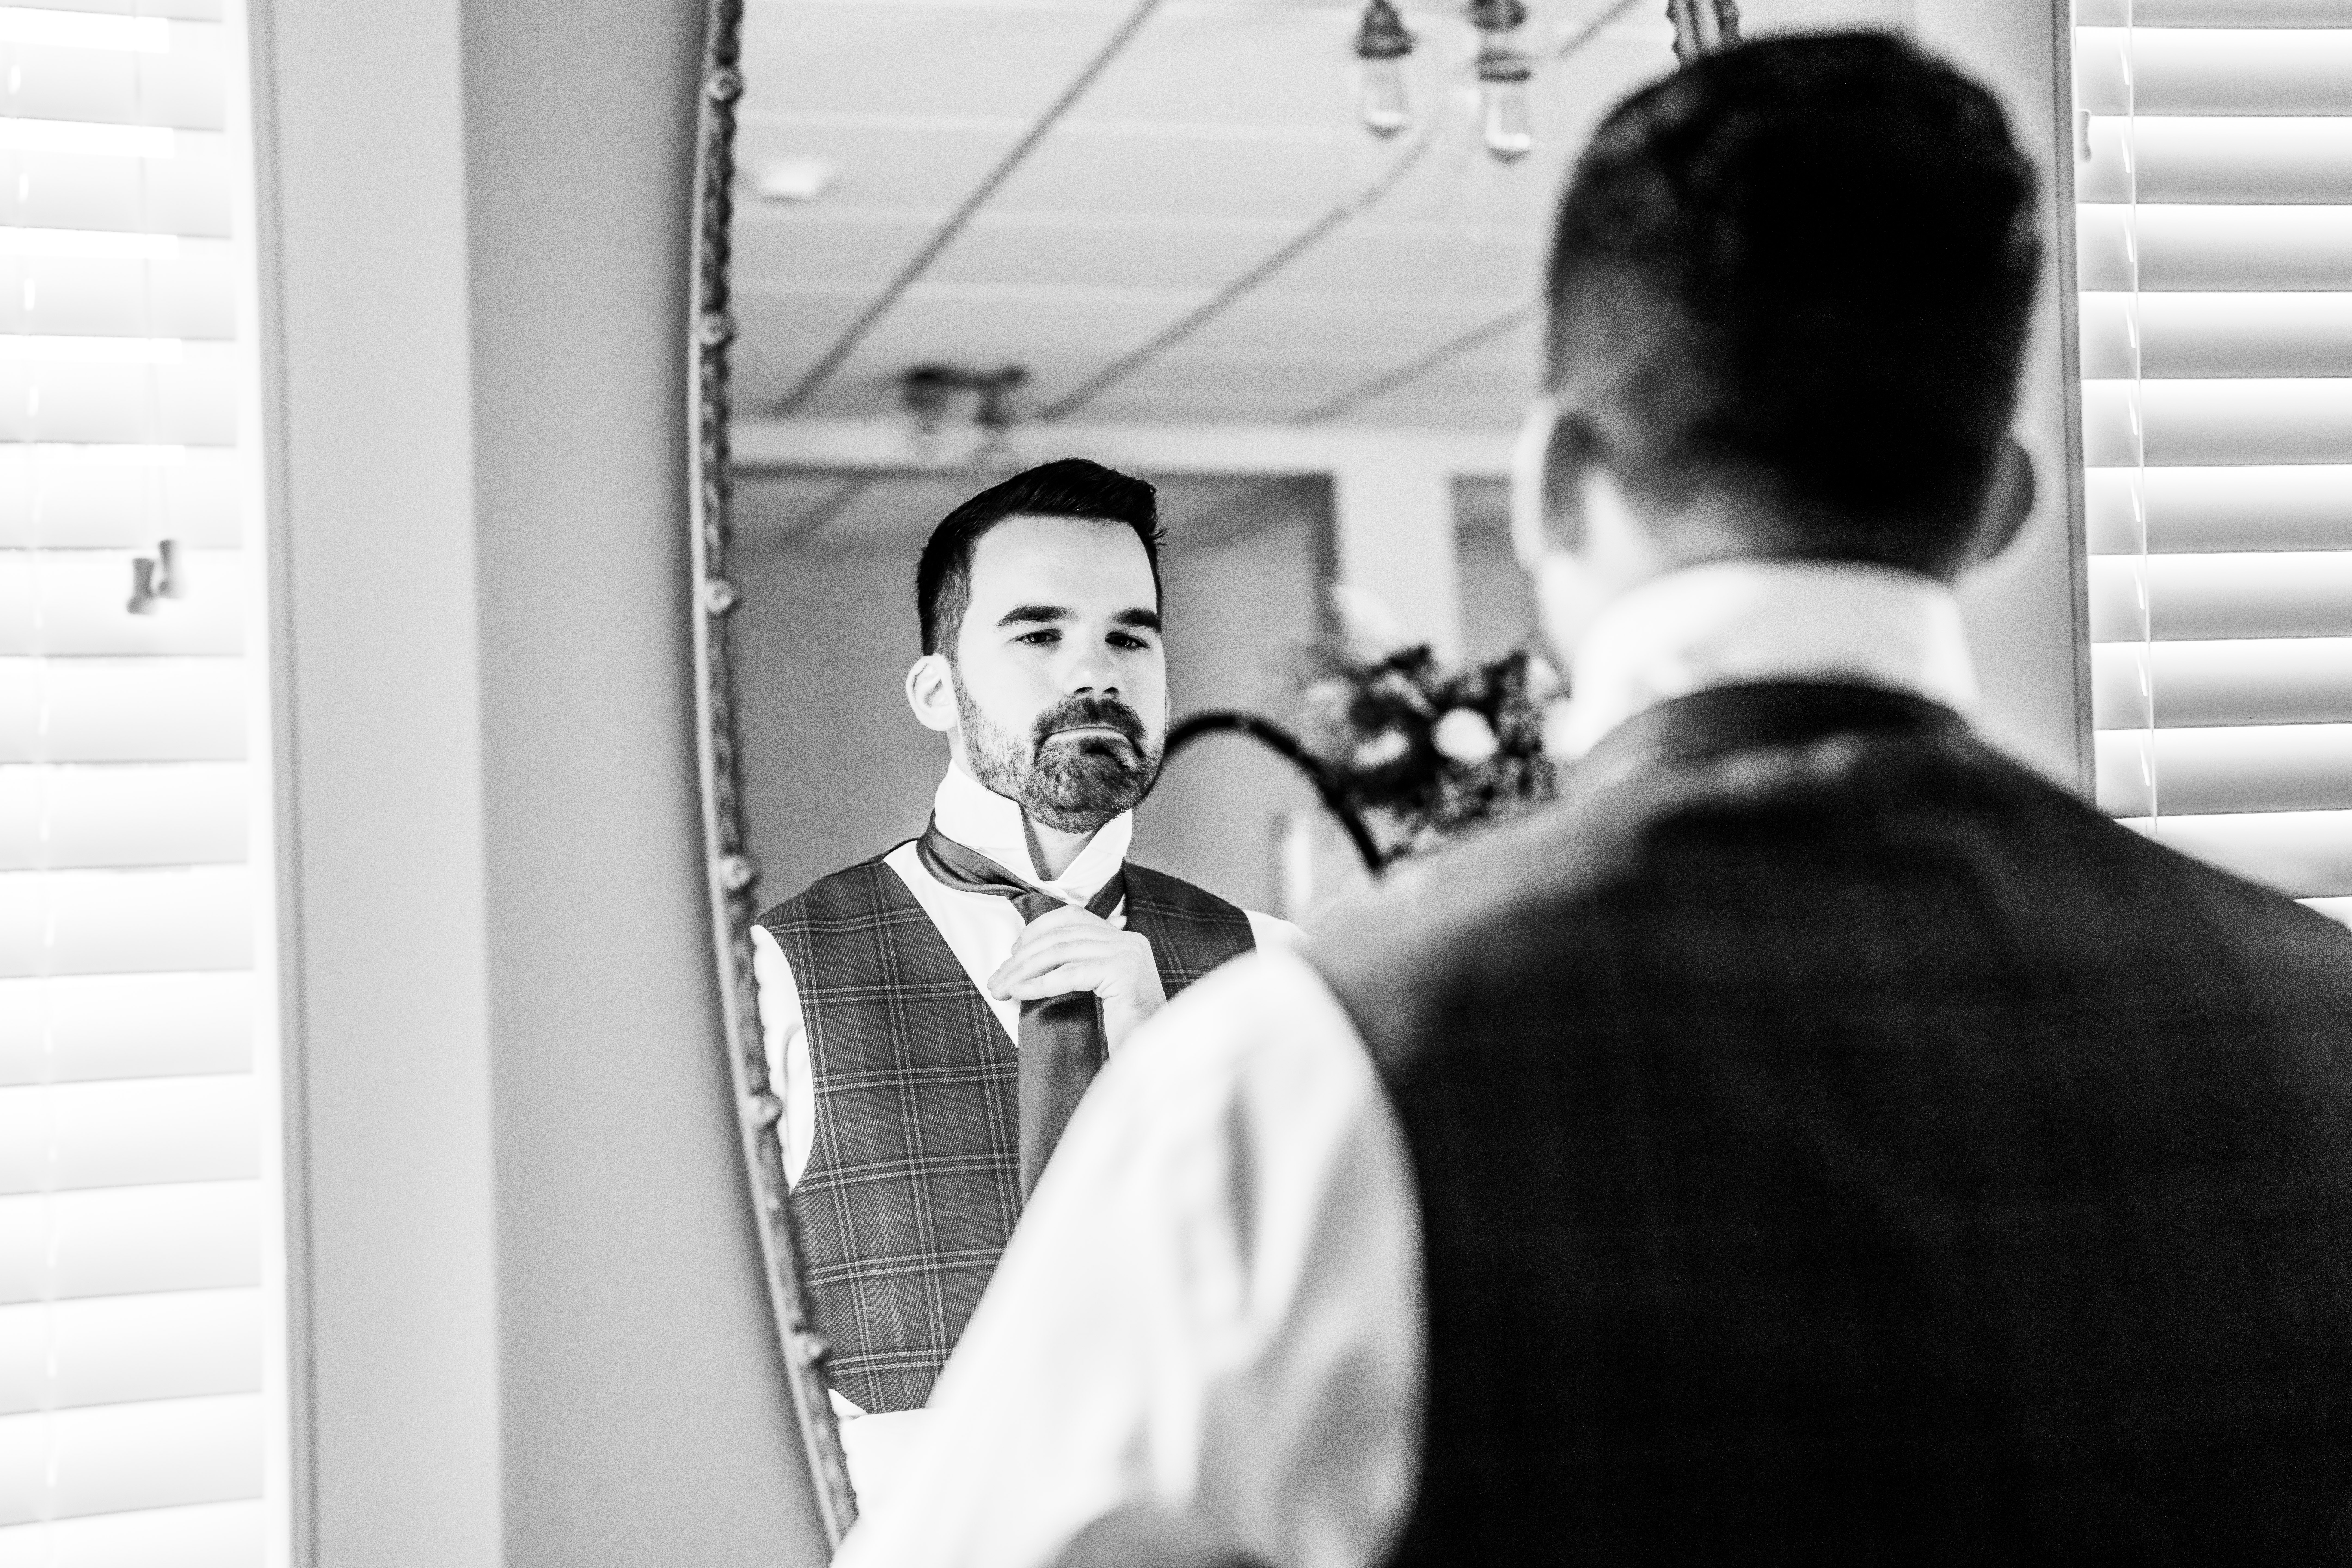 Running Deer Golf Club Wedding Venue, Running Deer Golf Club Wedding Photographer, NJ Weddings, New Jersey Wedding Photographer, Pittsgrove Wedding Photographer, NJ Wedding Photographer, Salem County NJ  Photographer, New Jersey Wedding Venues, Salem County Wedding Photography, Wedding Inspiration, Wedding Planning, Unique Wedding Photos, Wedding Photo Ideas, black and white candid photograph of groom looking into the mirror while fixing his tie 